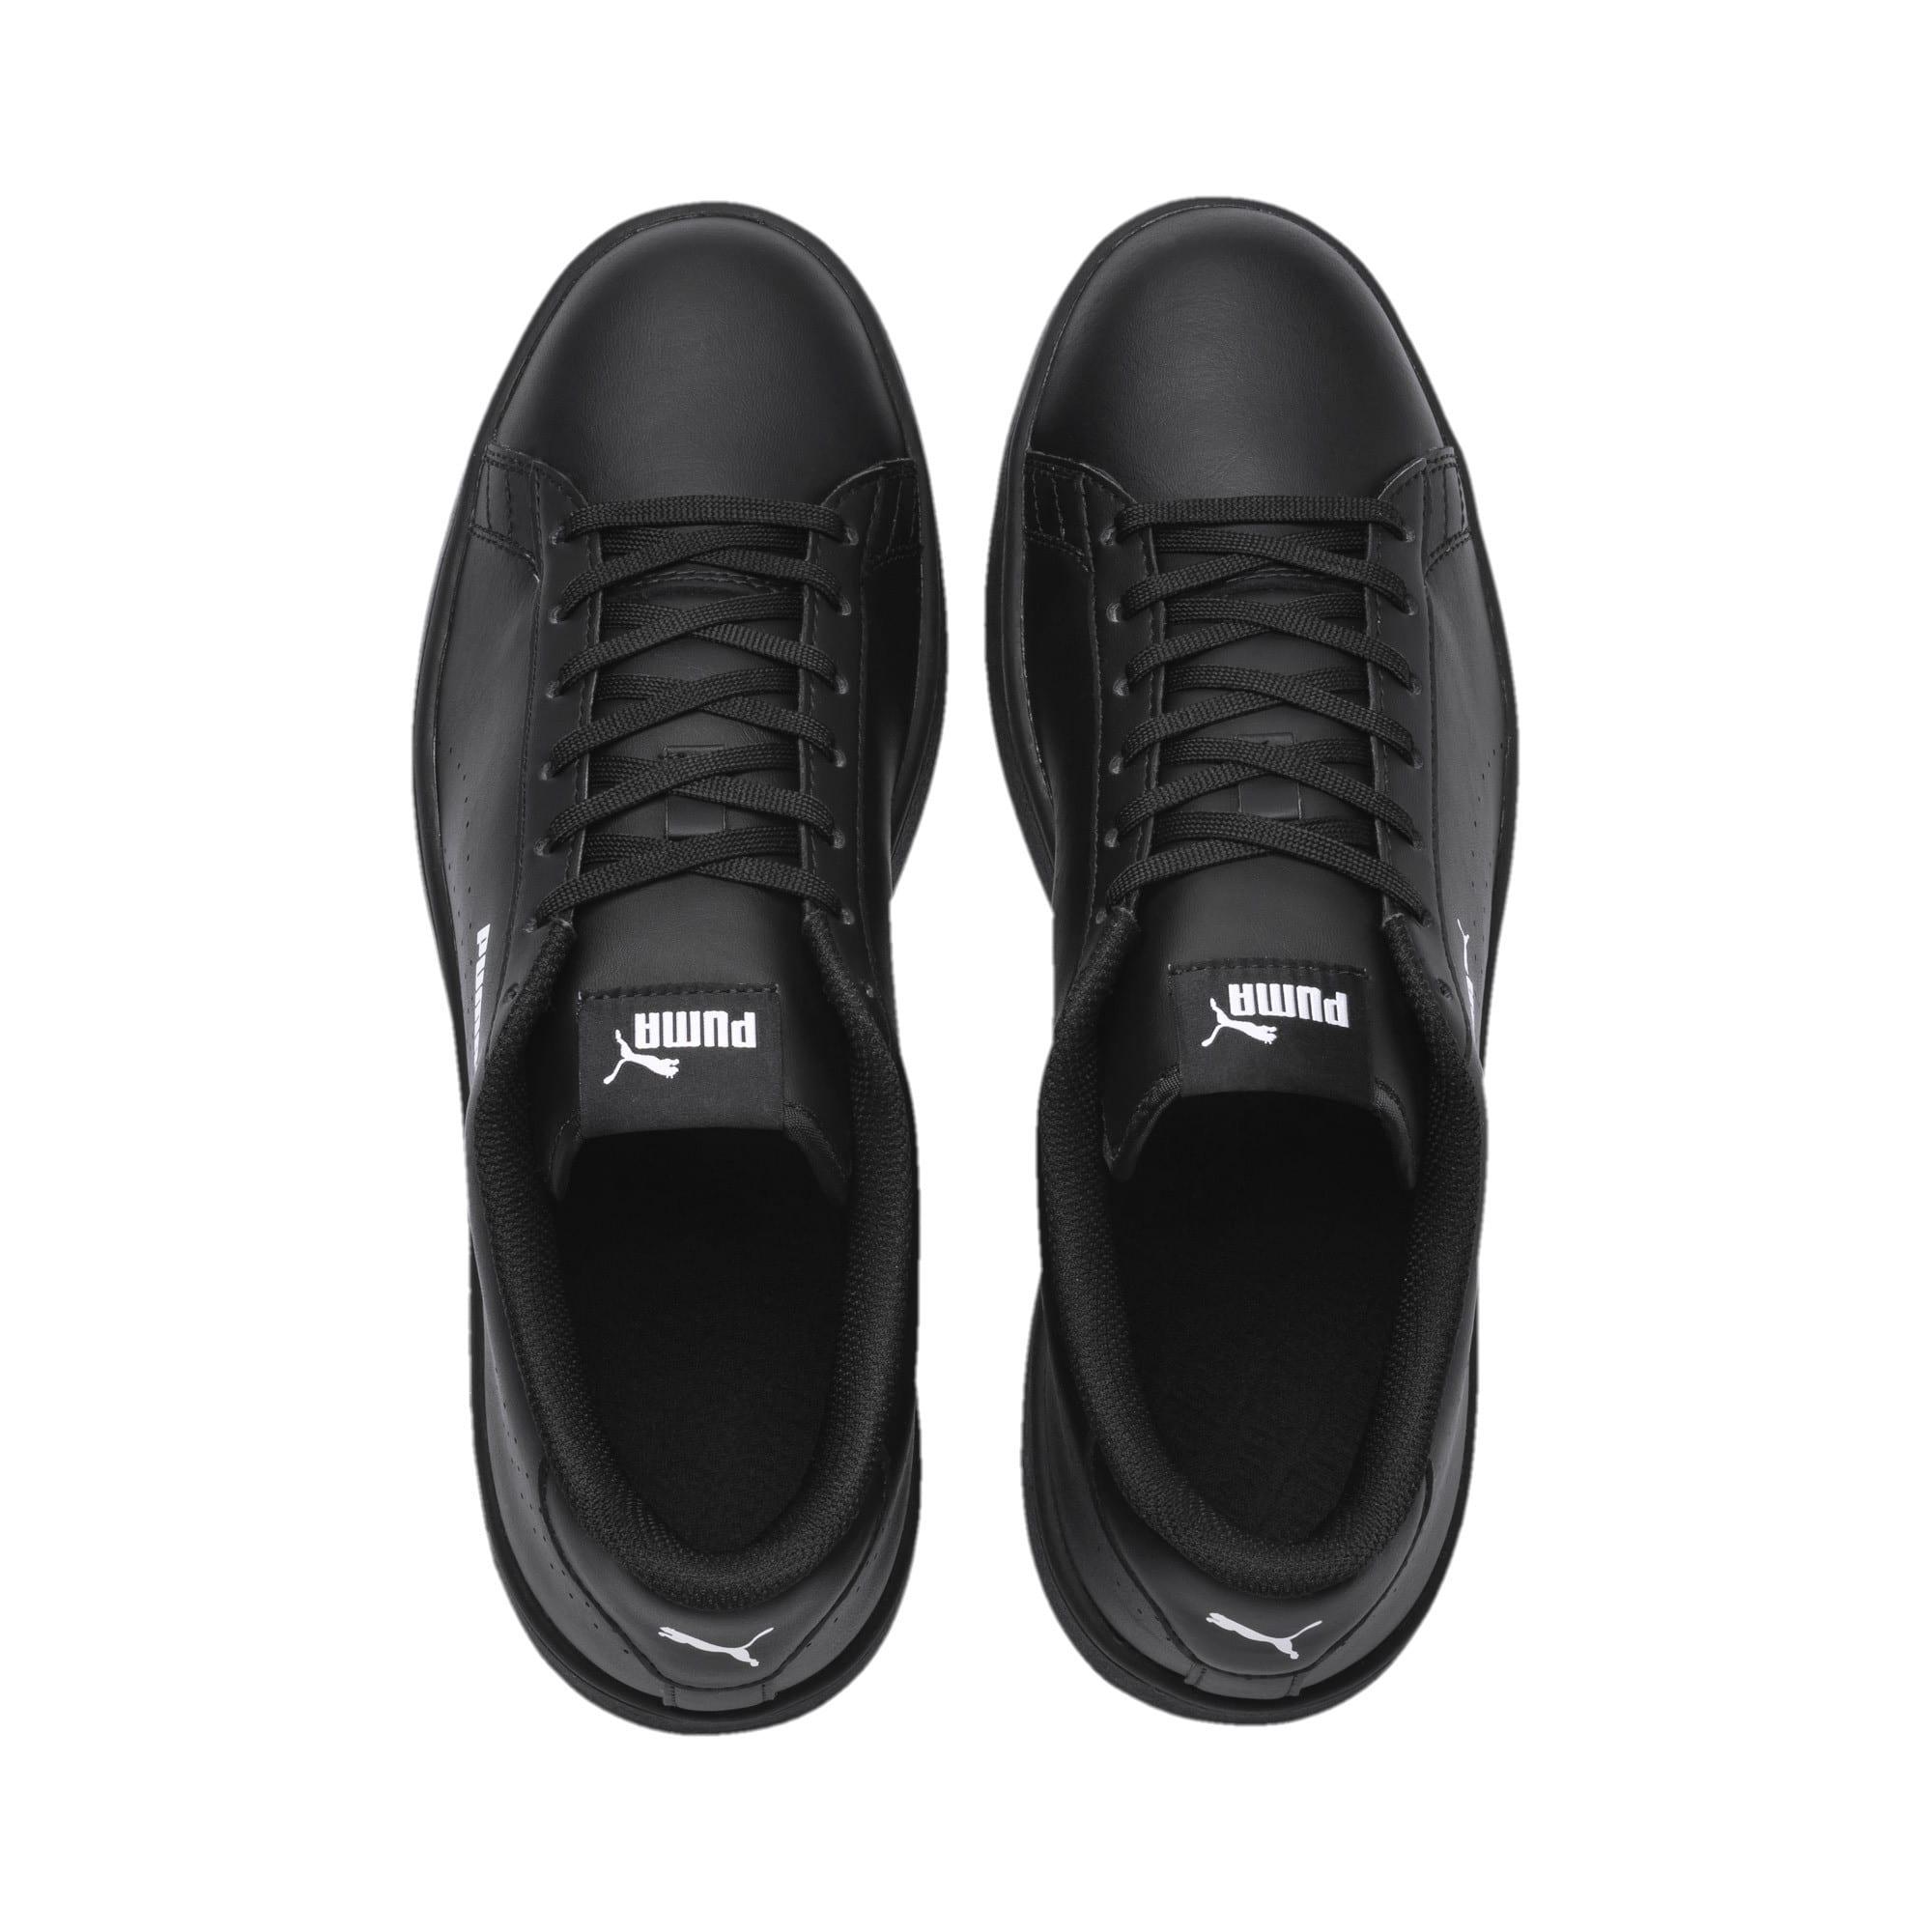 PUMA Smash V2 Leather Perf Sneakers in Black for Men - Lyst